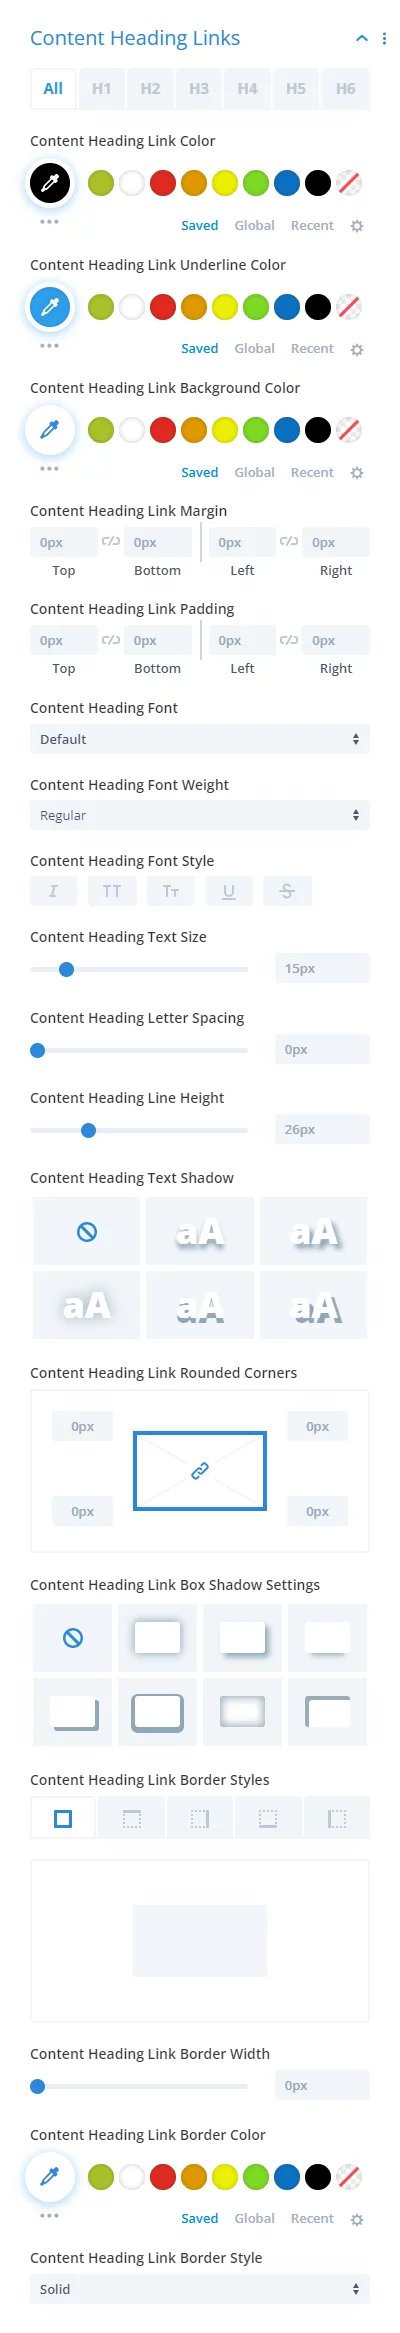 content heading links settings in the Divi Table of Contents Maker module plugin 1.2 by Pee Aye Creative